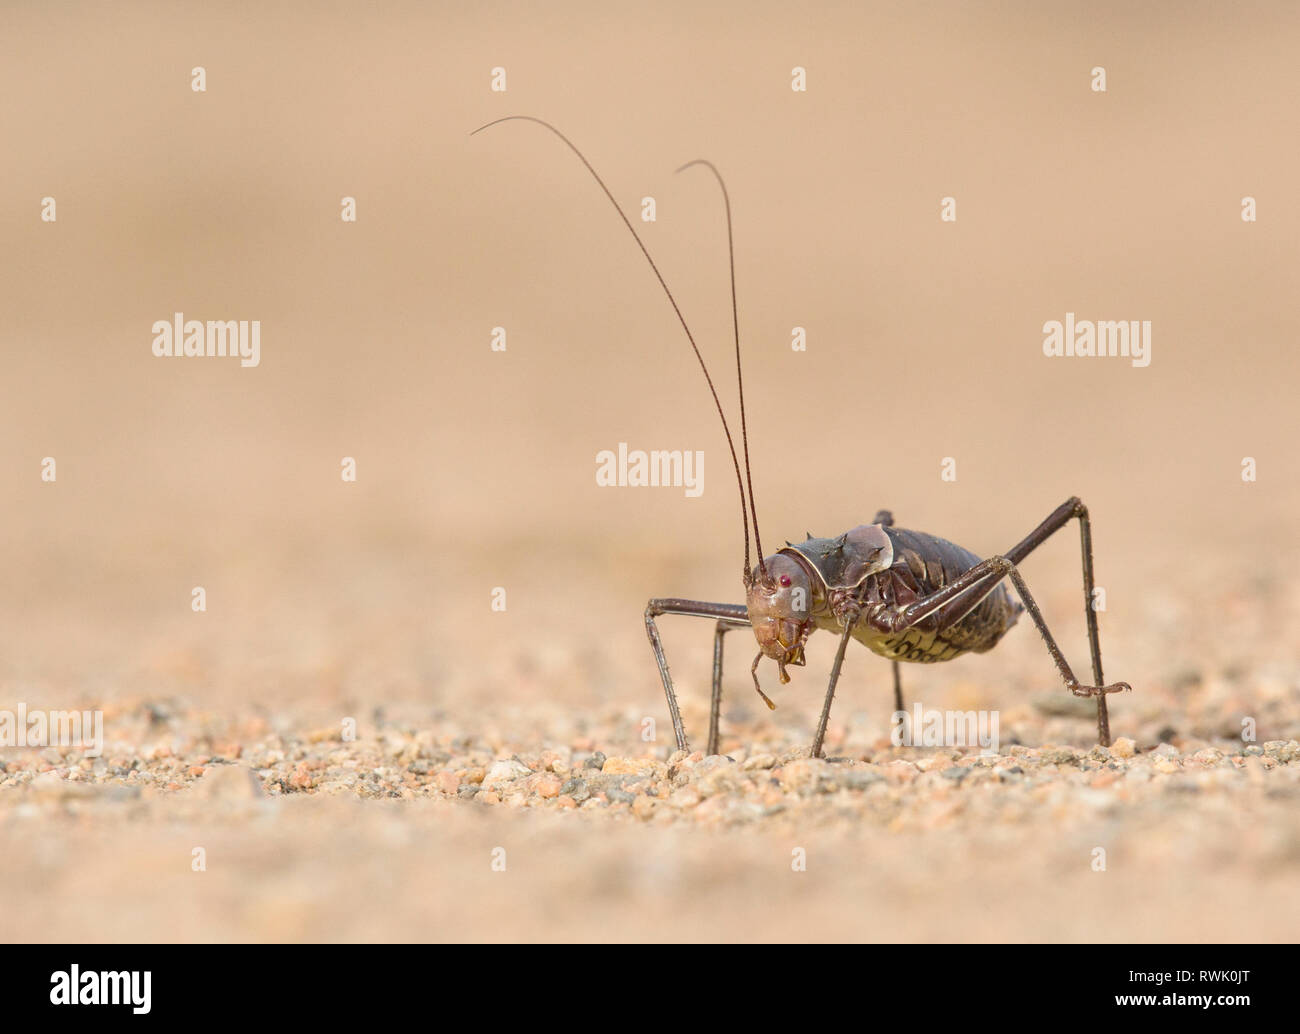 A Ground or Armour plated cricket close up. Stock Photo